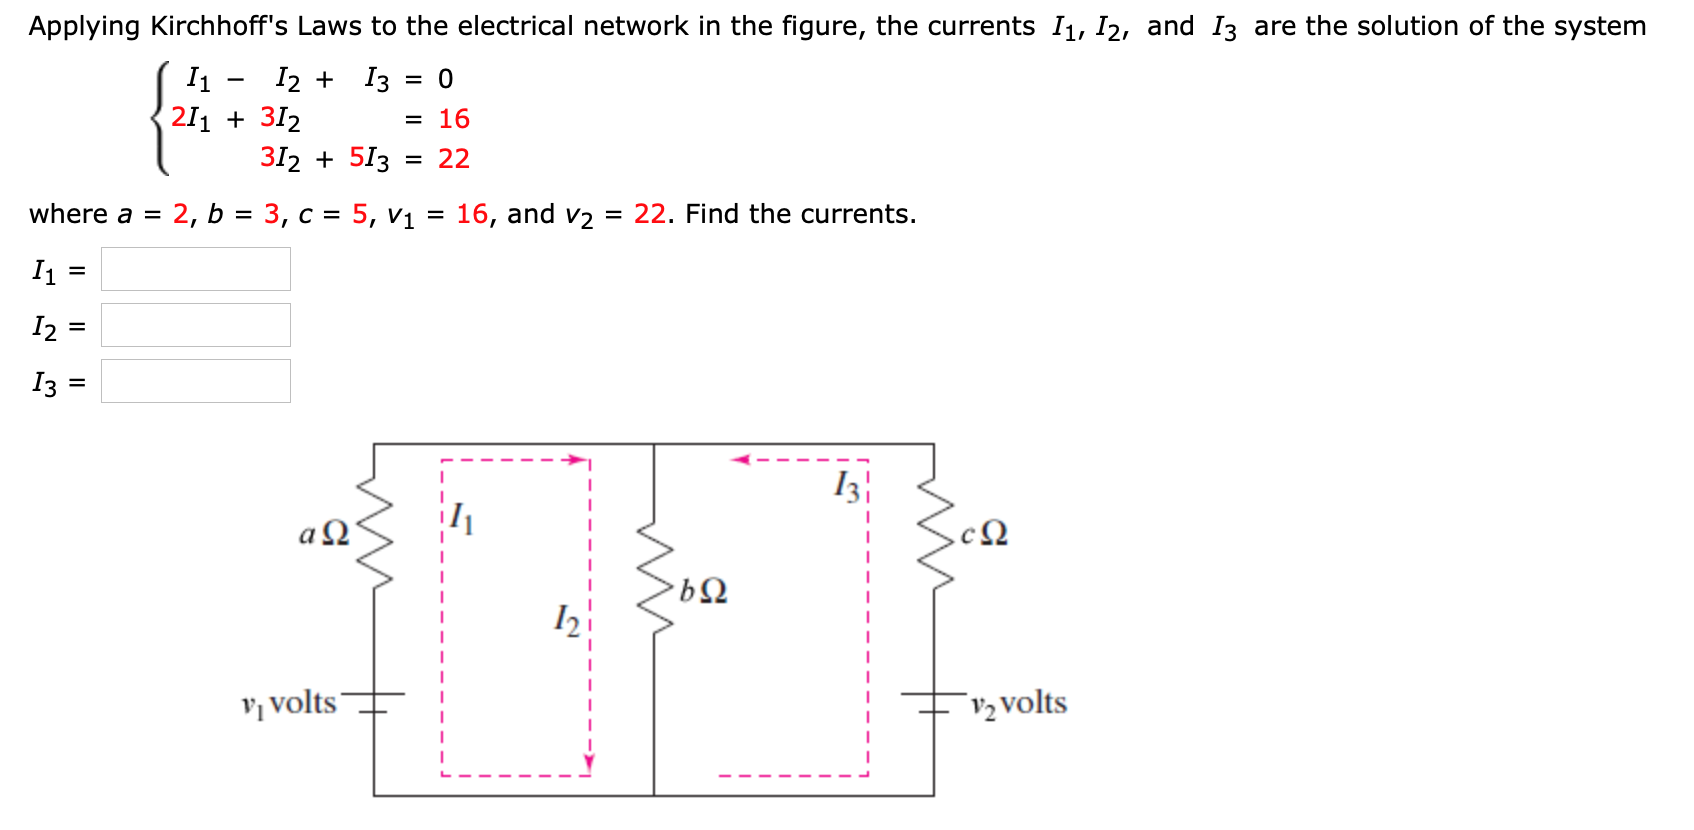 Applying Kirchhoff's Laws to the electrical network in the figure, the currents I1, I2, and I3 are the solution of the system
I1
211 + 312
I2 + I3 = 0
= 16
312 + 513 :
22
where a =
2, b = 3, c = 5, v1
16, and v2
= 22. Find the currents.
I2 =
Iз
a Q'
V, volts
V2 volts
II
